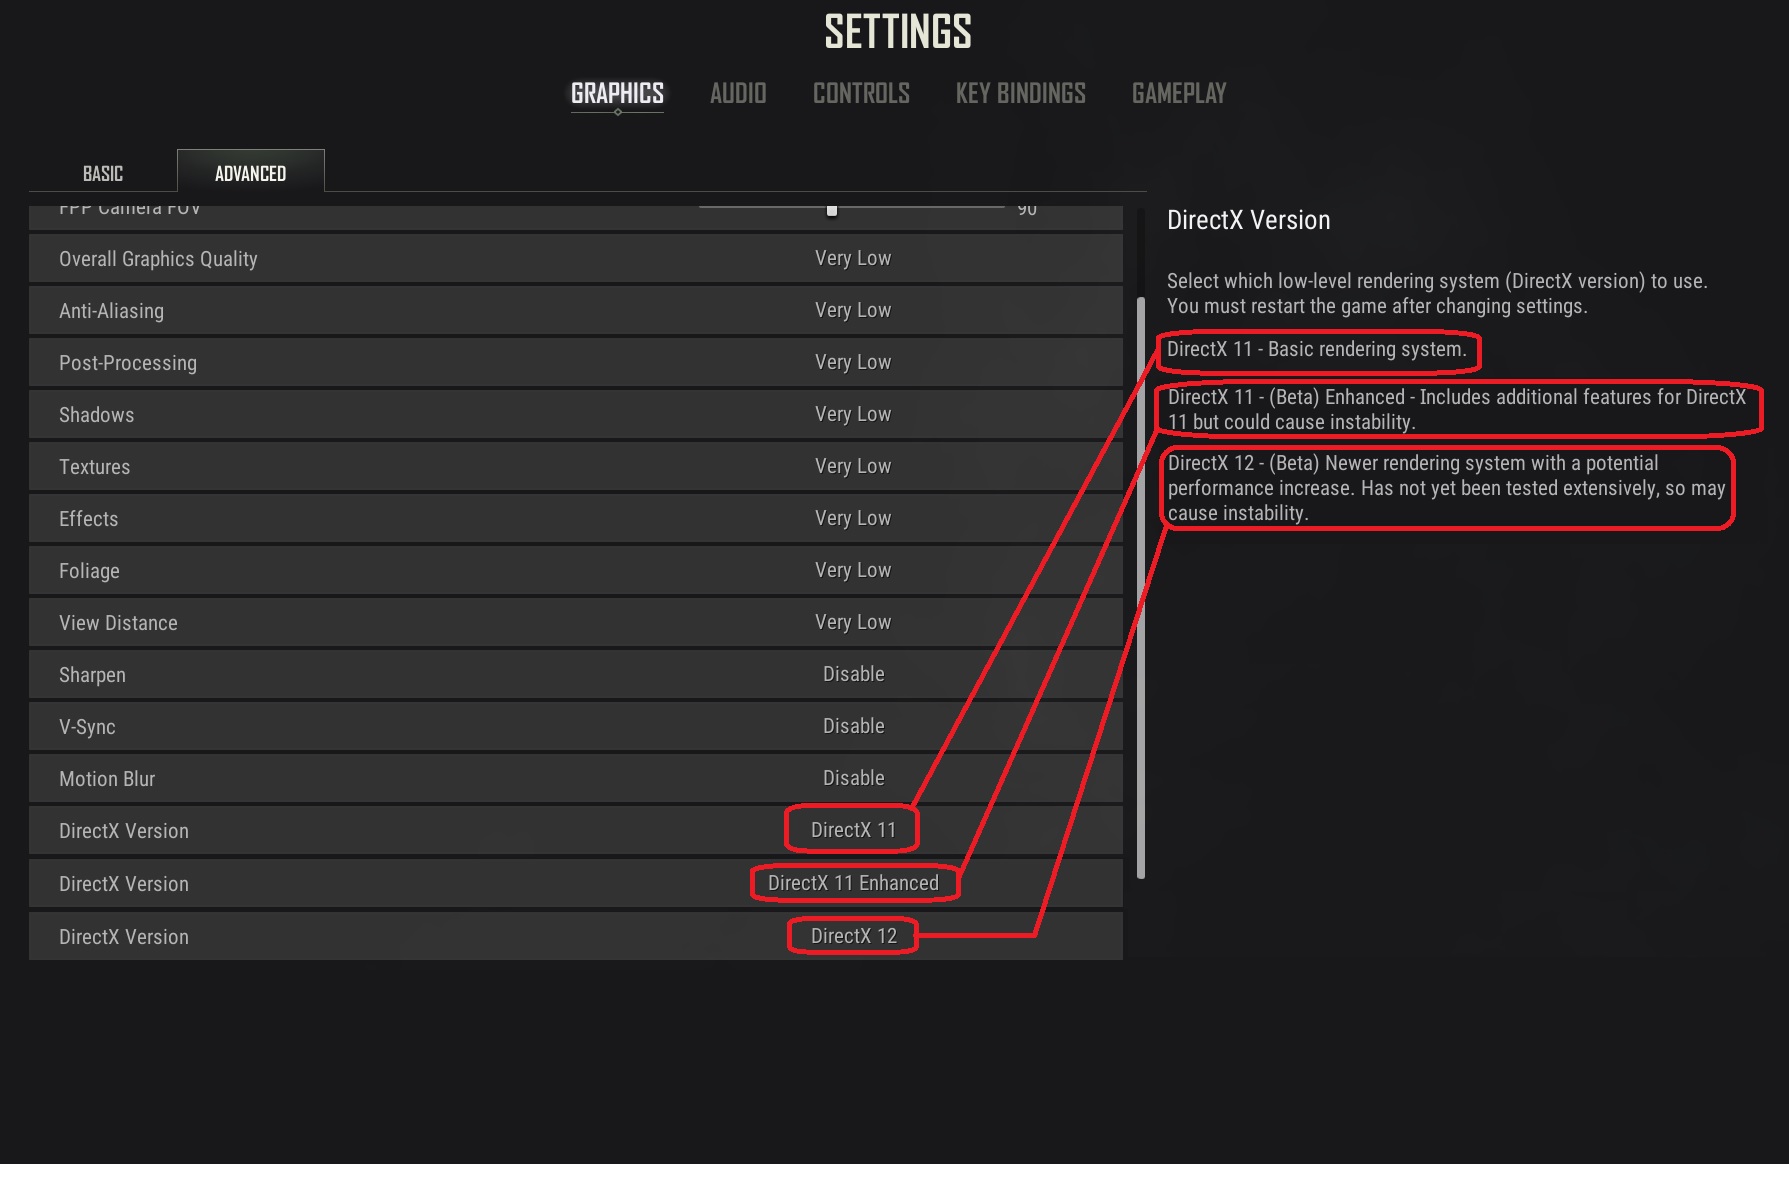 Launch PUBG and go to the Settings menu
Lower the Texture Quality setting